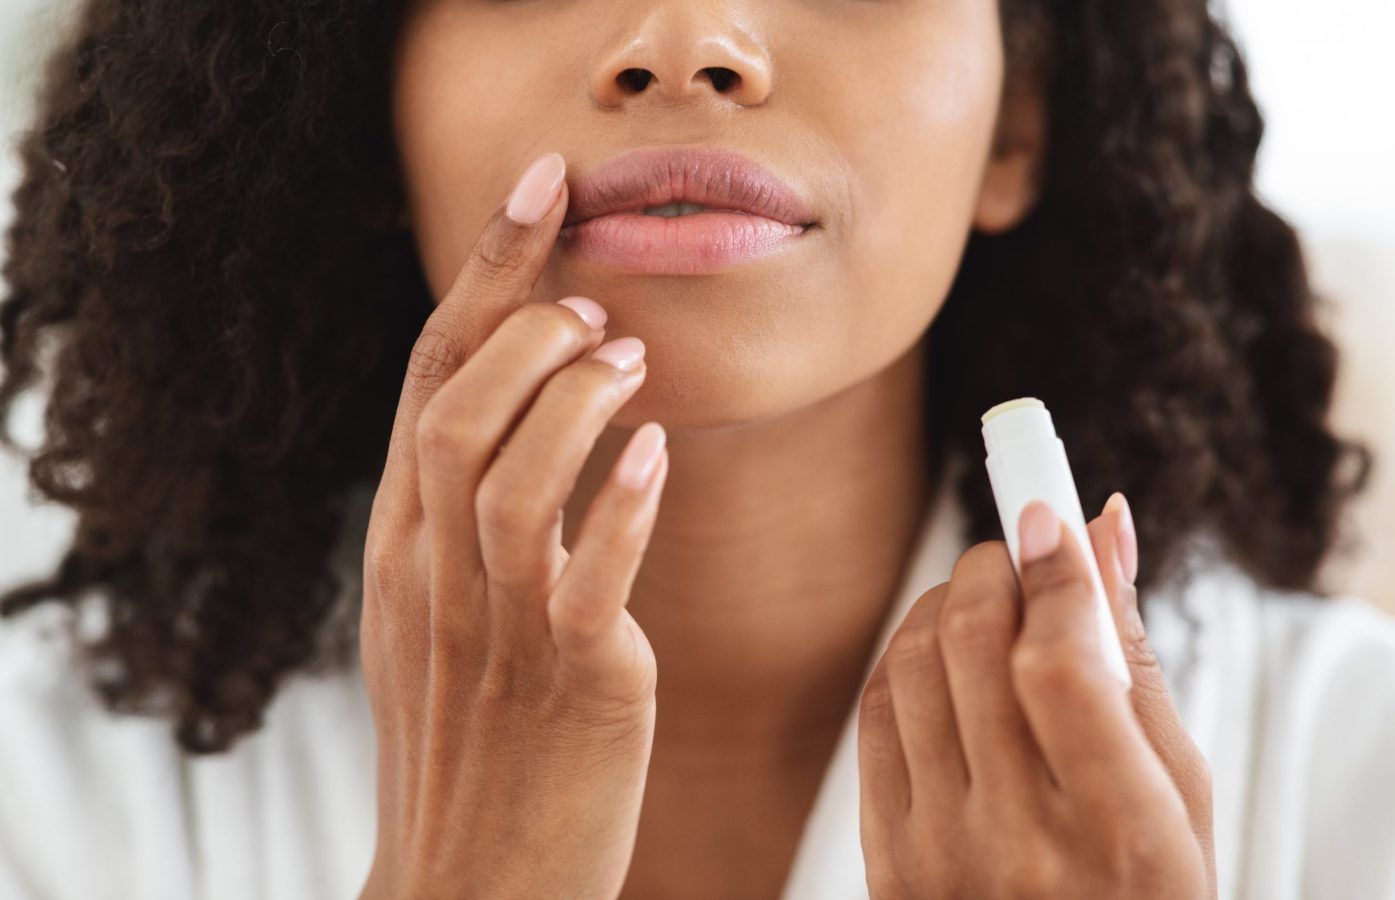 Natural chapped lip remedies that you can make at home, according to dermatologists